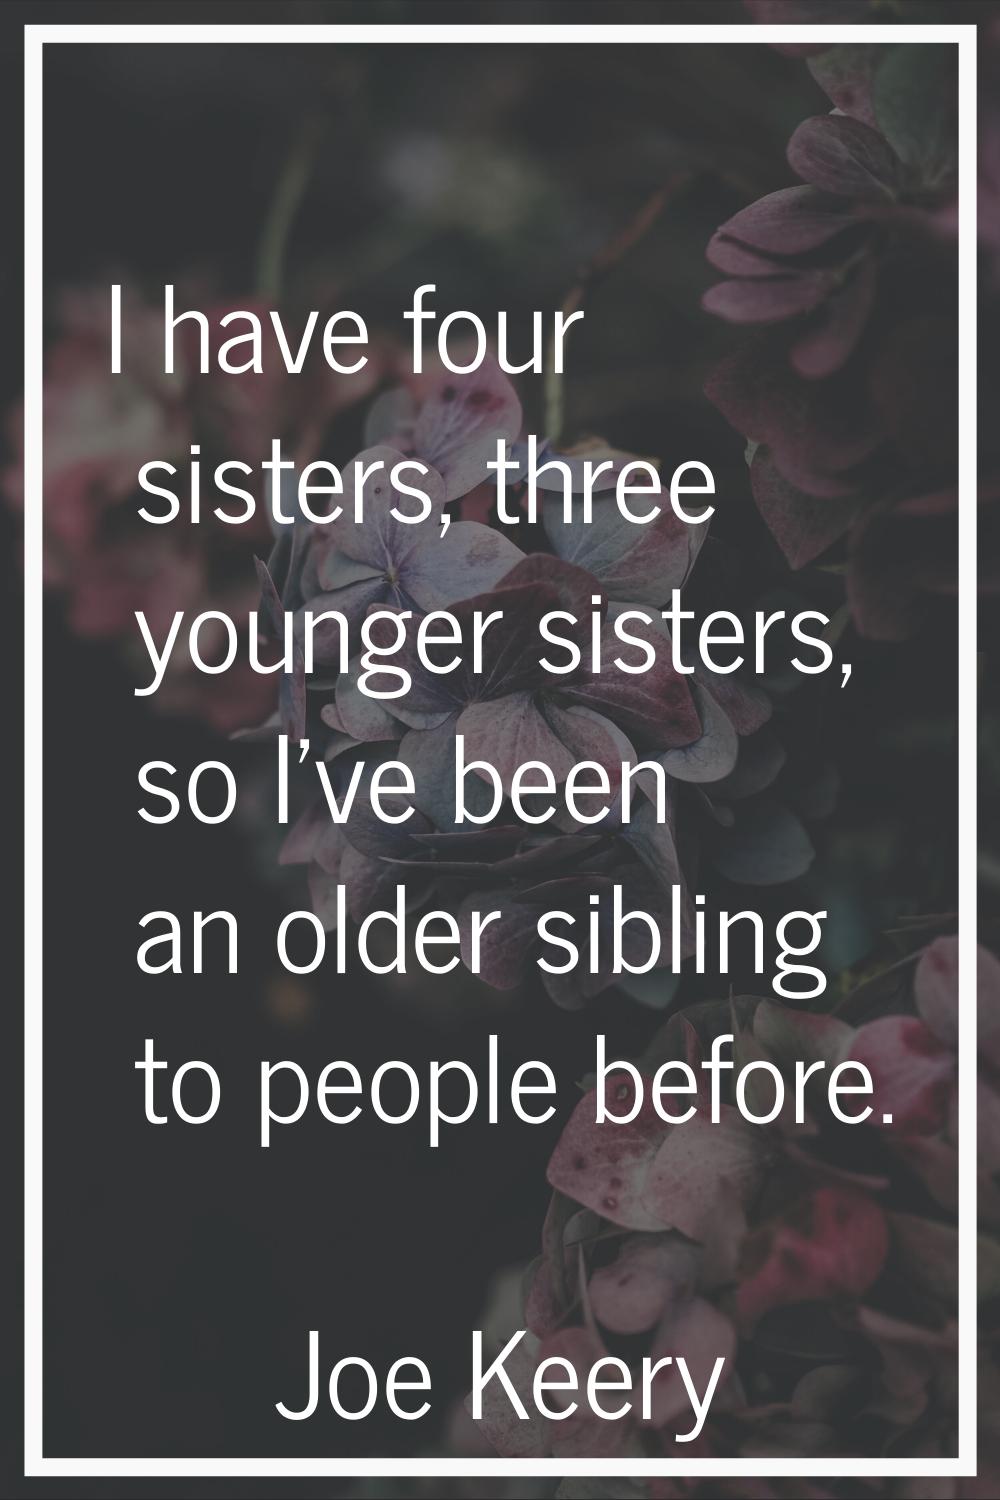 I have four sisters, three younger sisters, so I've been an older sibling to people before.